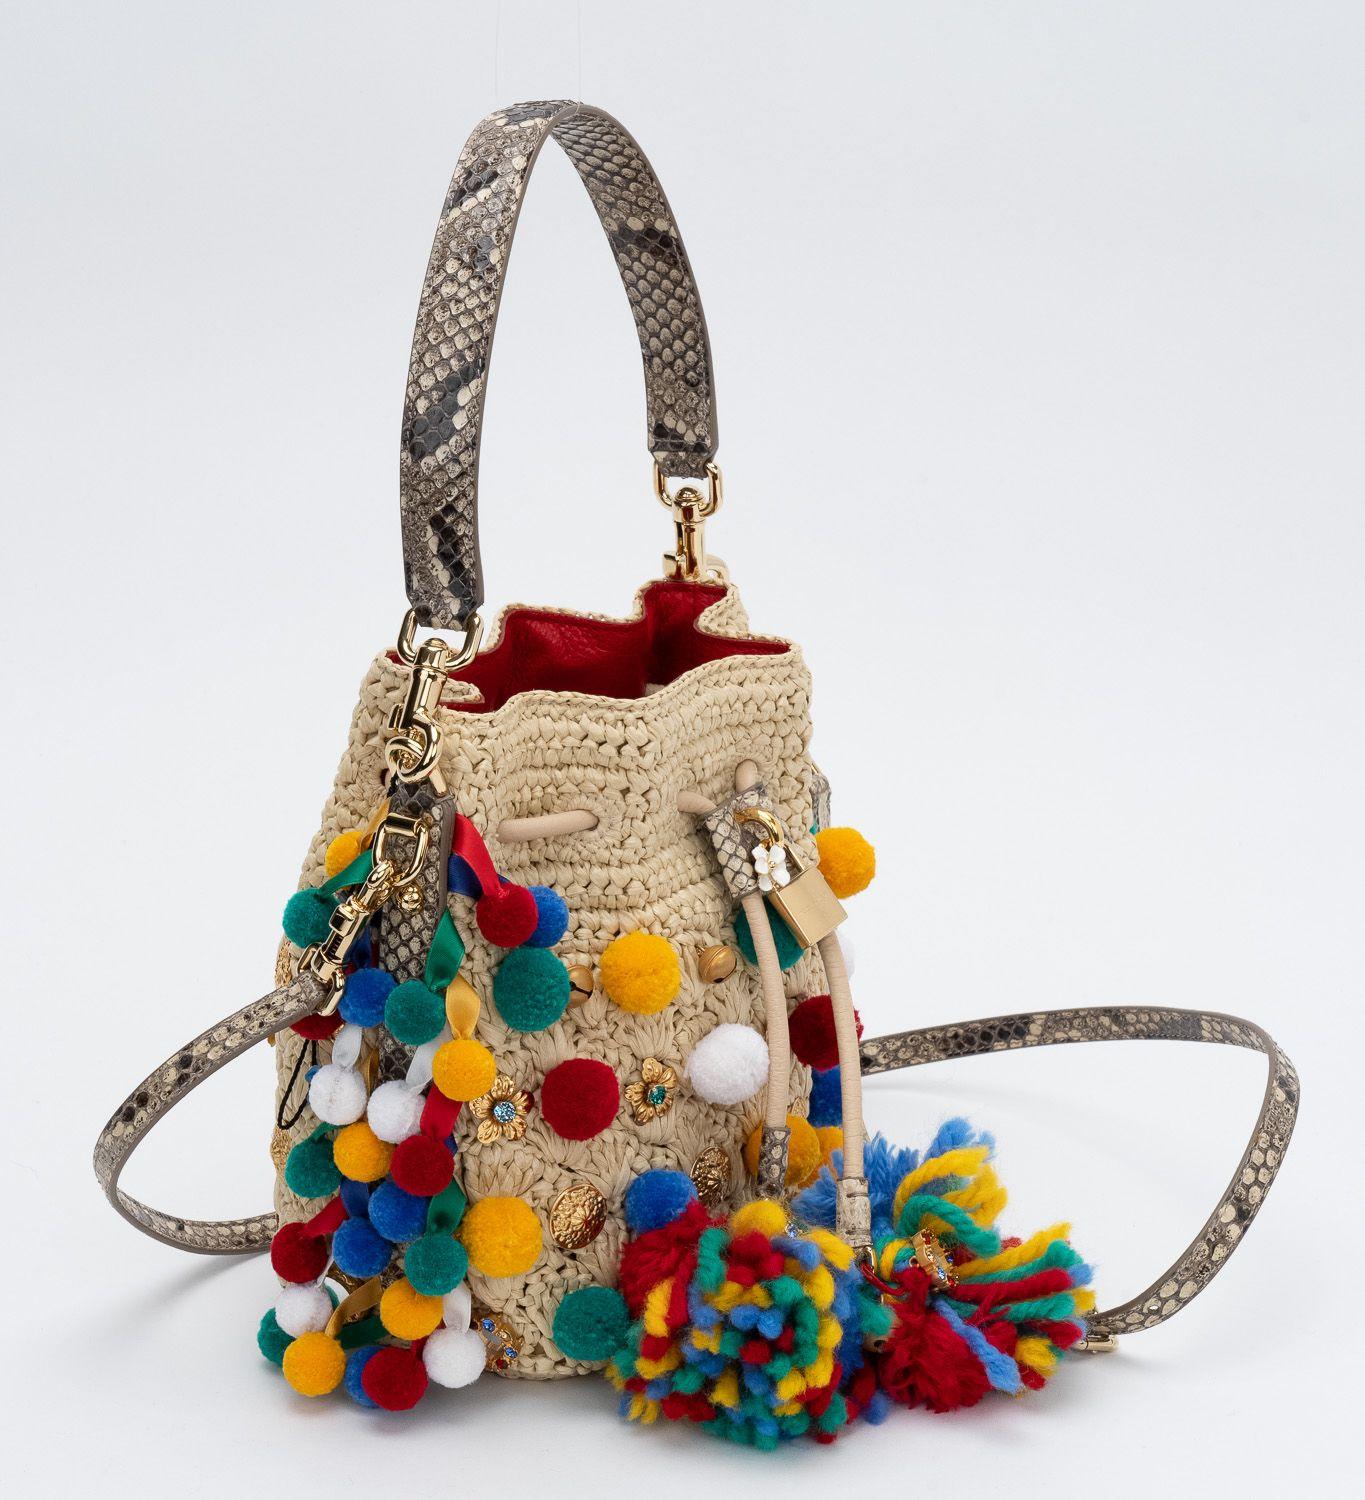 Dolce & Gabbana new medium raffia bag with multicolor pom poms with python short and long strap. Handle drop 6”,shoulder drop 21” (both detachable).
Original tag and dust cover.
Due to California Wildlife Regulation this item does not ship to any